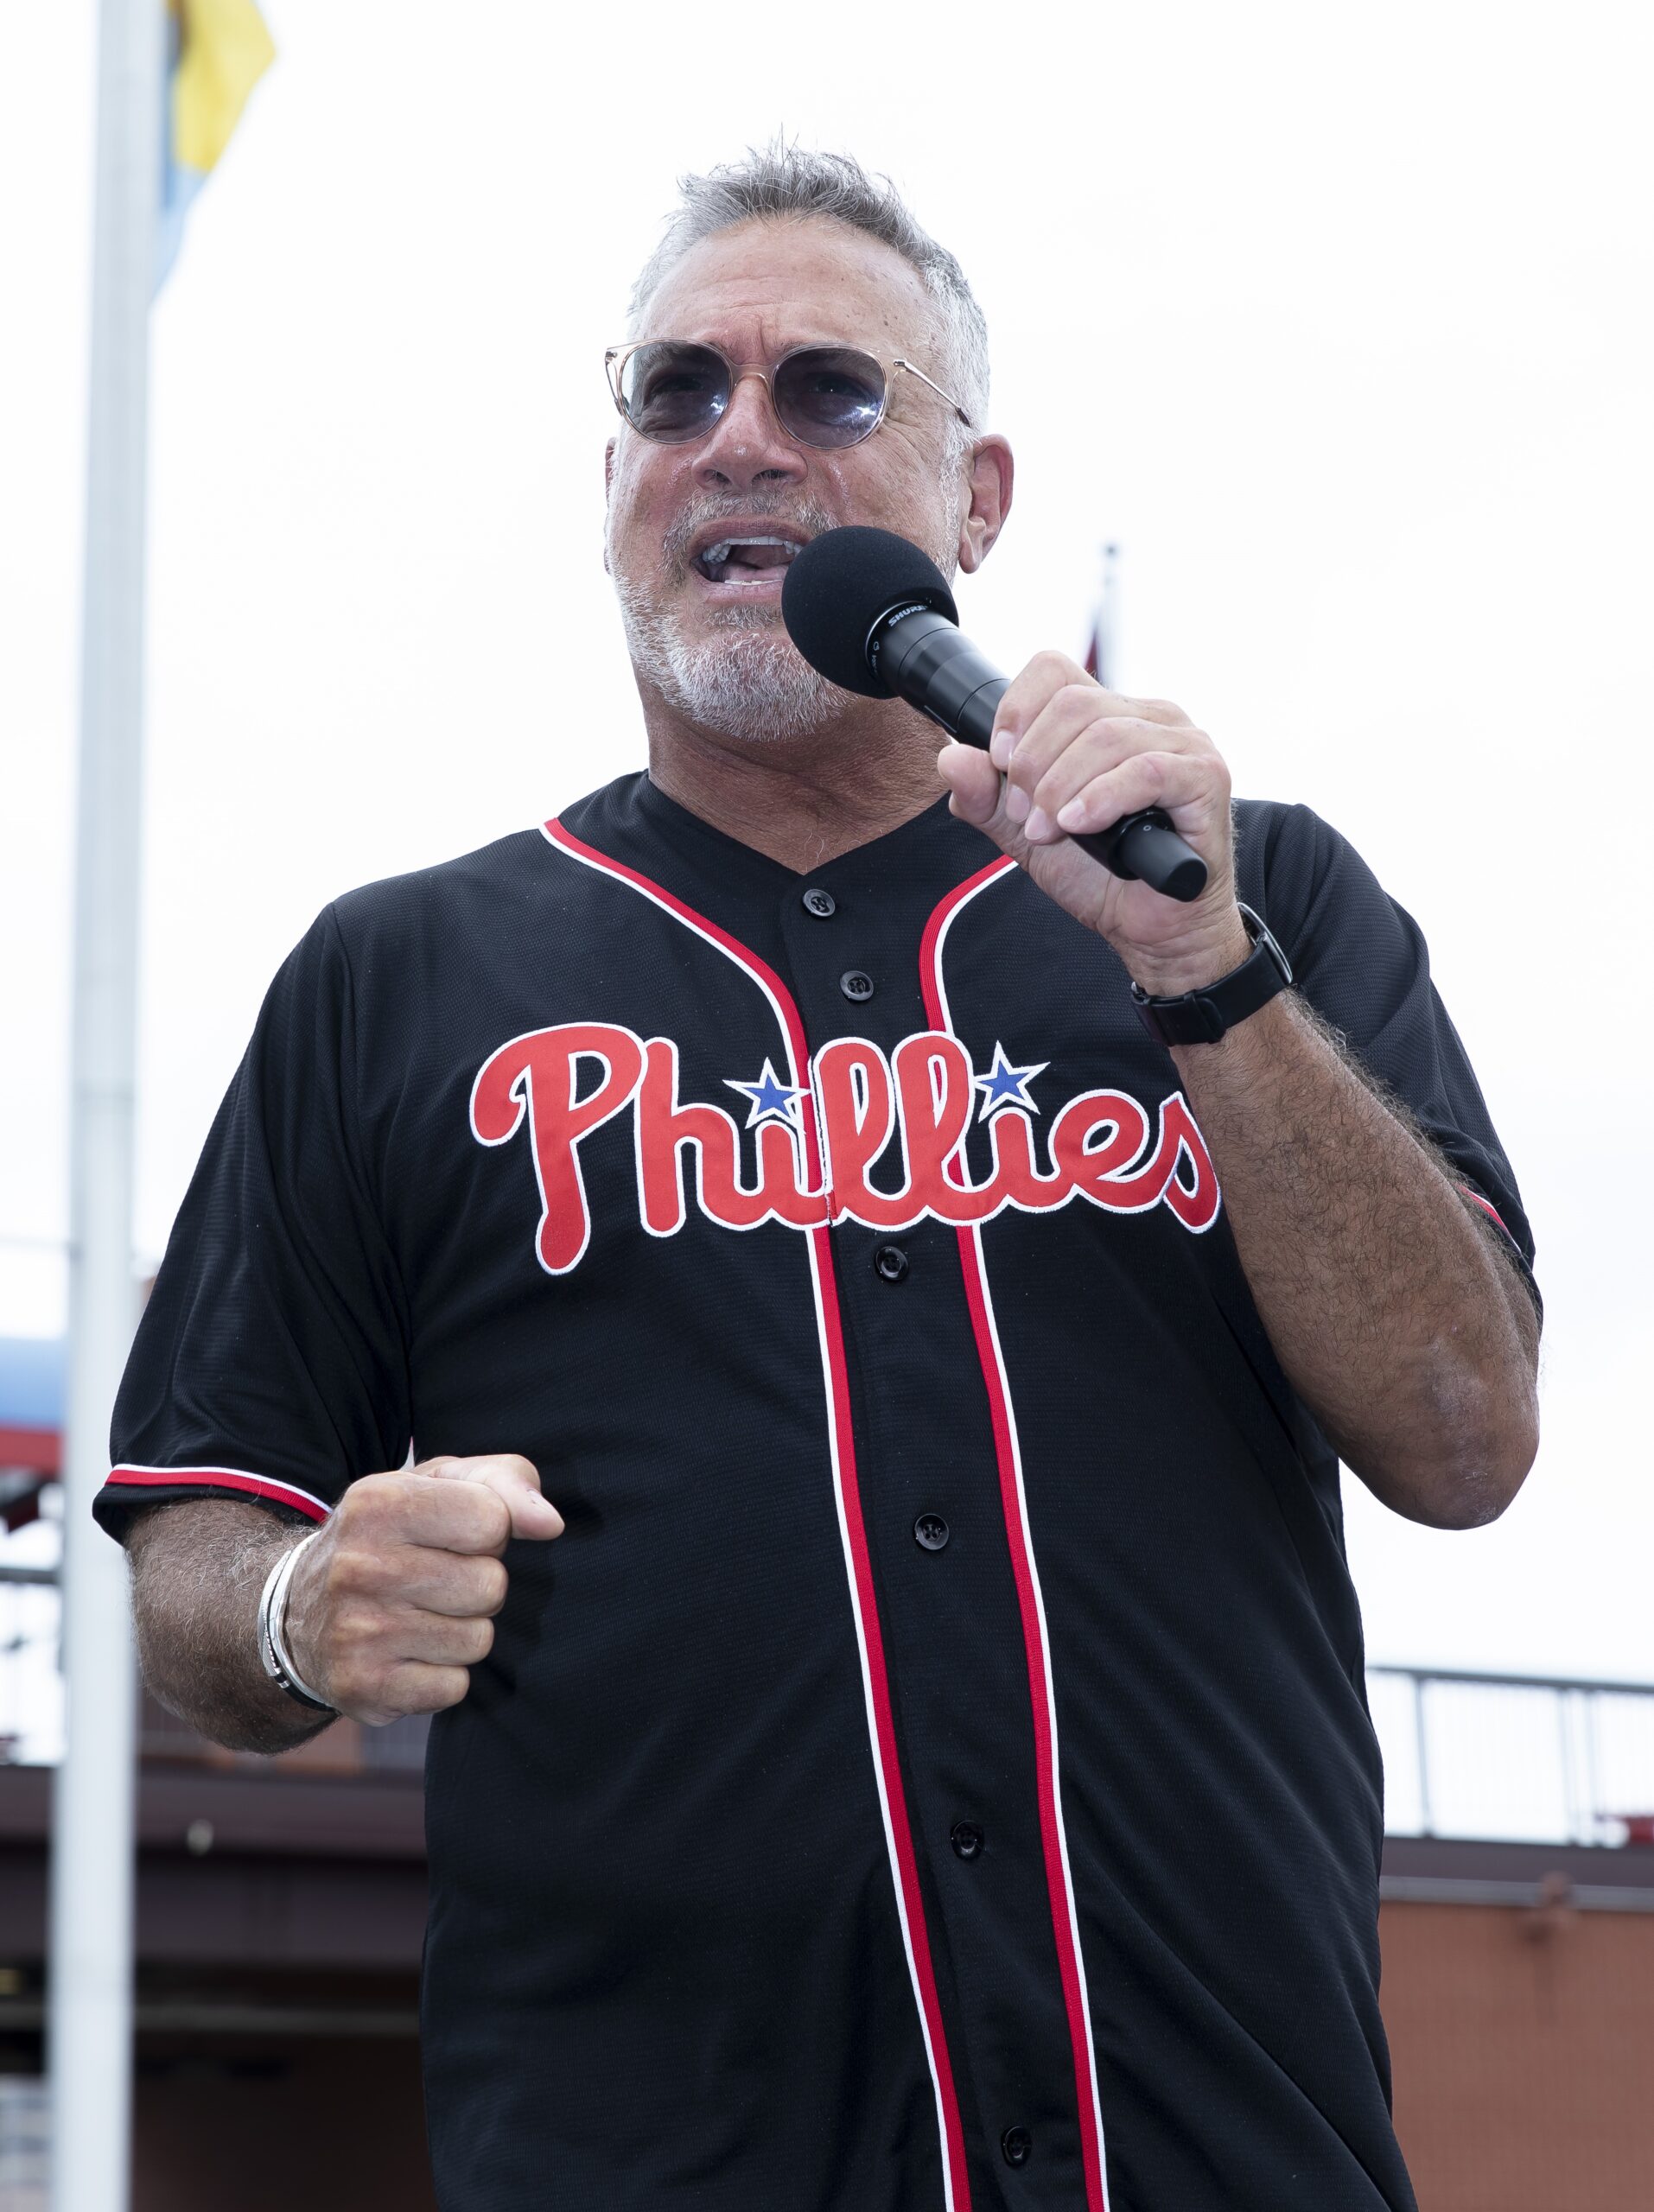 BVTLive! Eddie Bruce, Philadelphia Music icon, performs the national anthem live at the Phillies game on August 6th